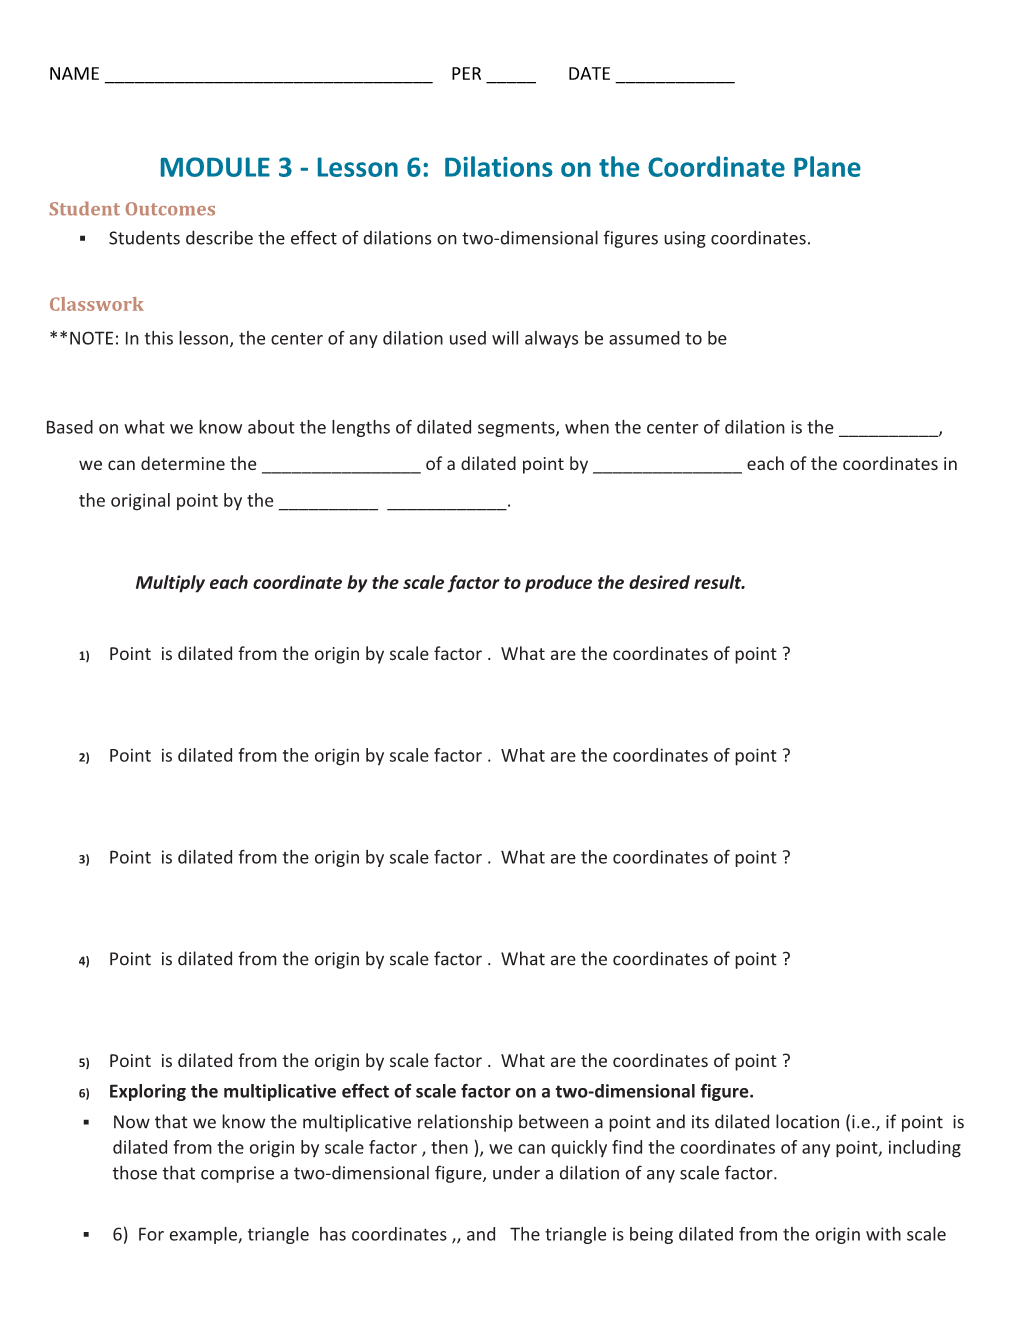 MODULE 3 - Lesson 6: Dilations on the Coordinate Plane